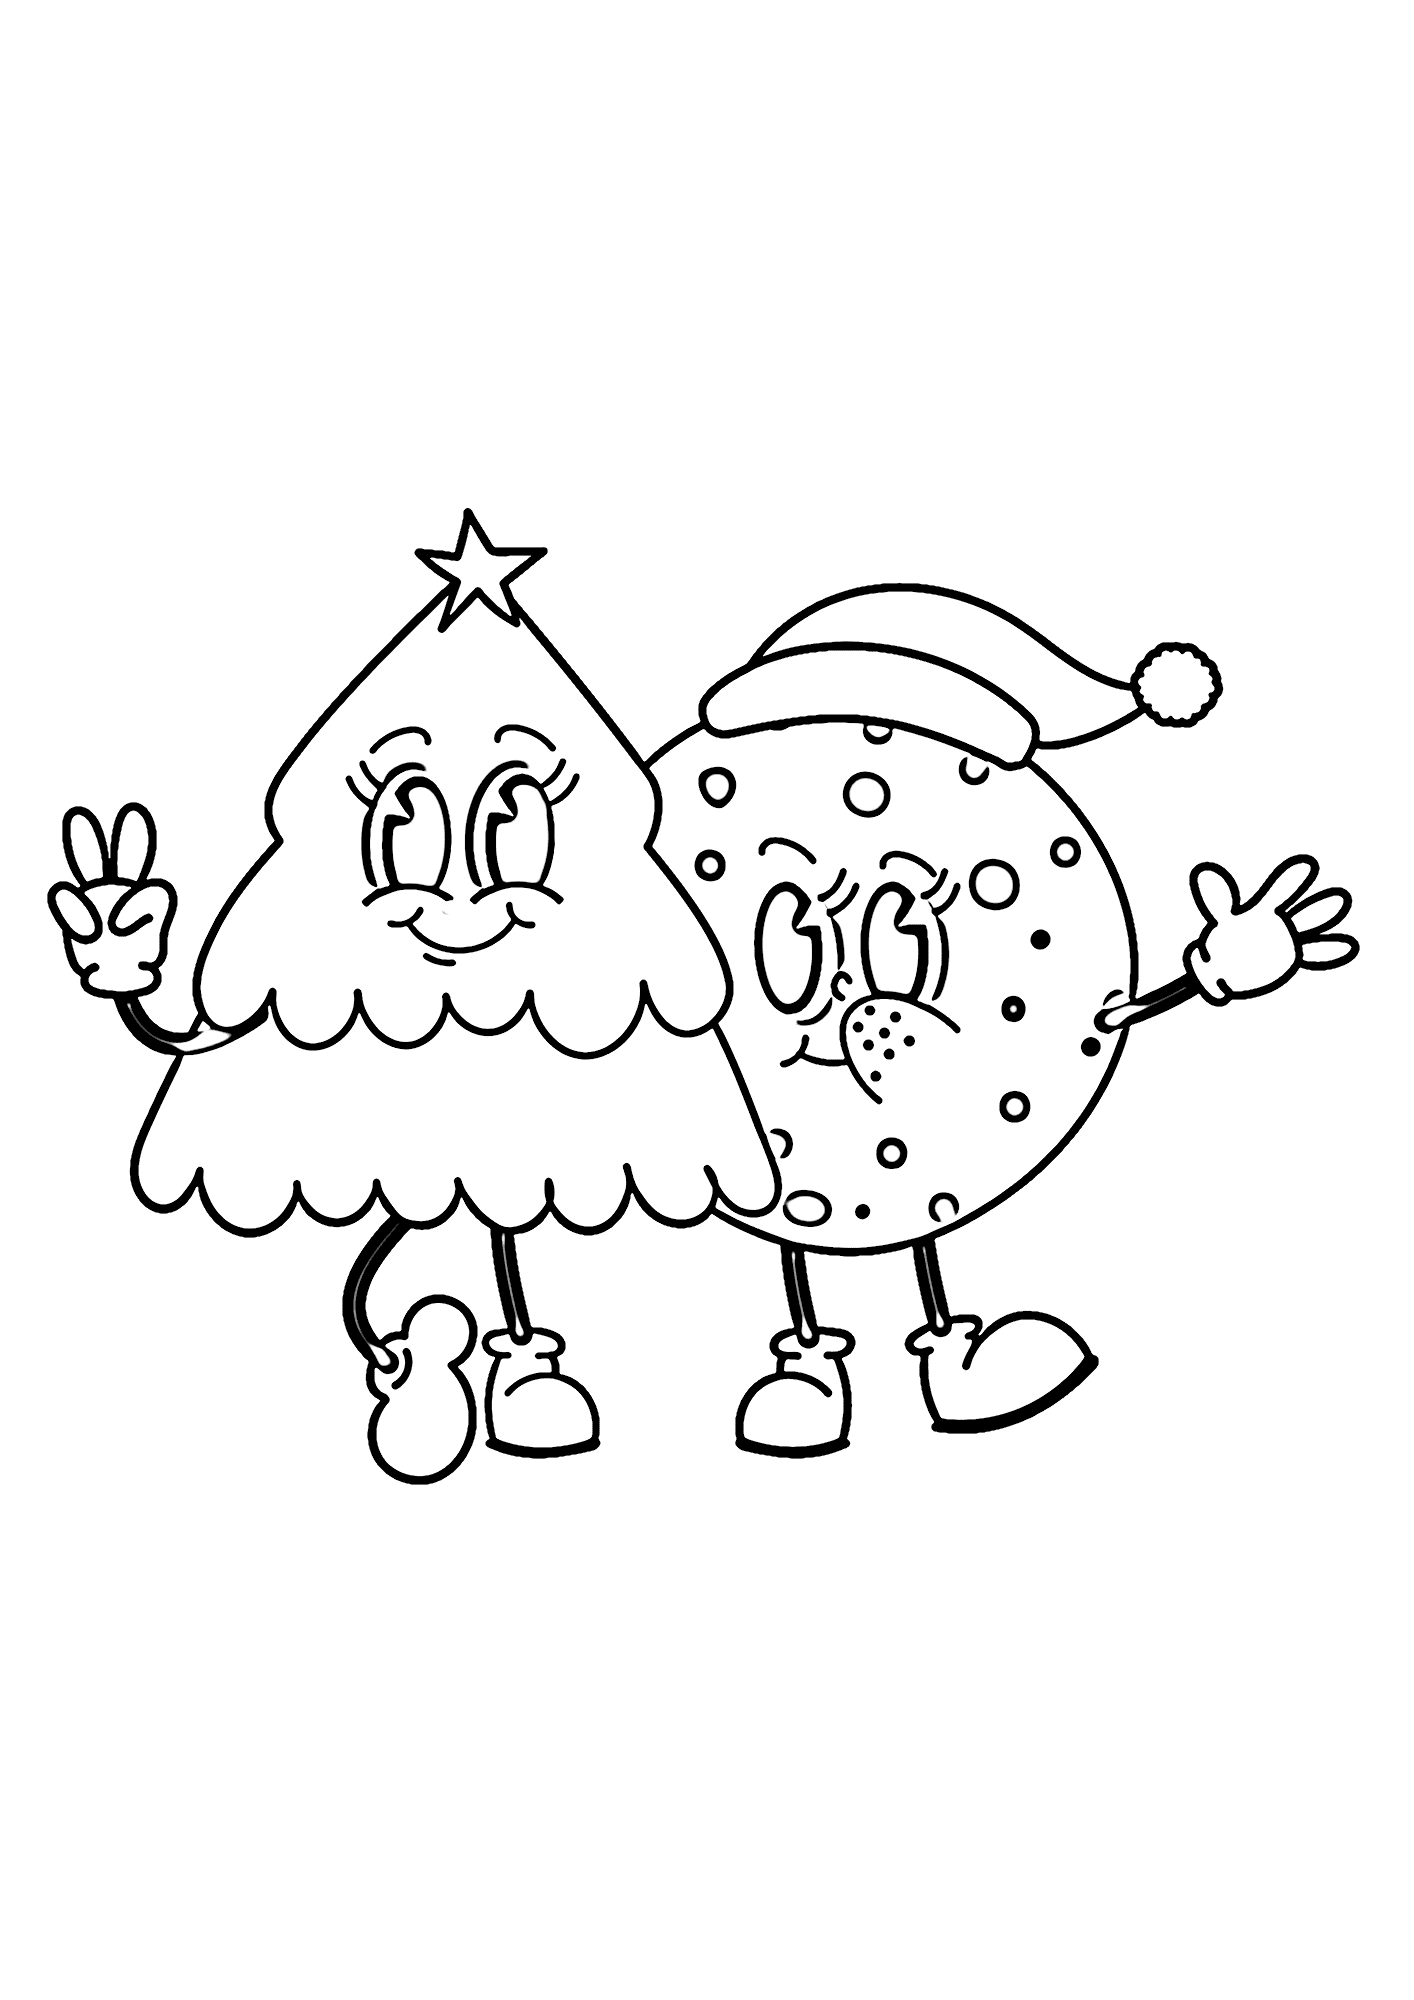 Groovy Christmas Tree Coloring Page